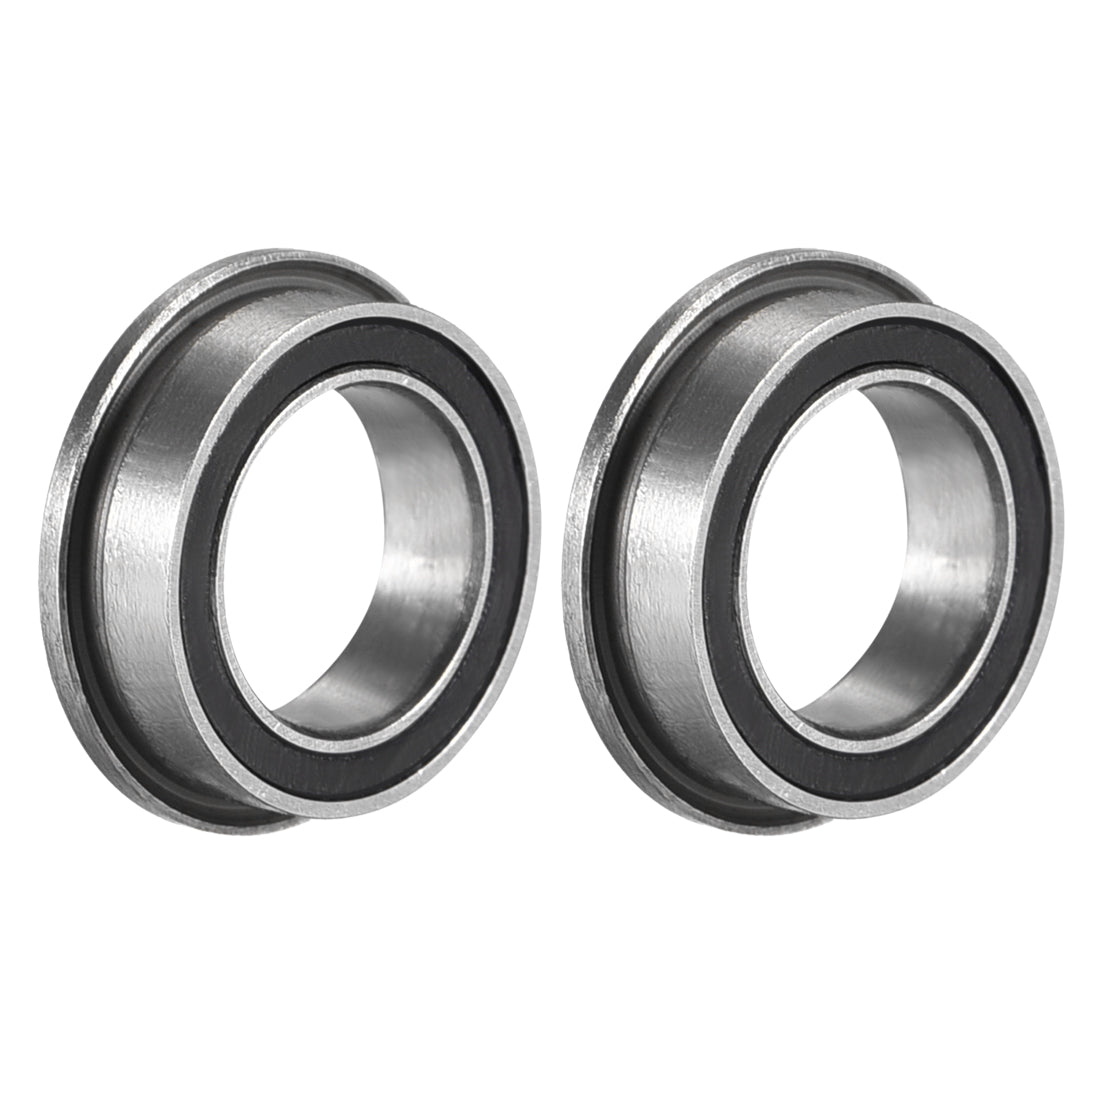 uxcell Uxcell MF128-2RS Flange Ball Bearing 8x12x3.5mm Sealed Chrome Steel Bearings 2pcs